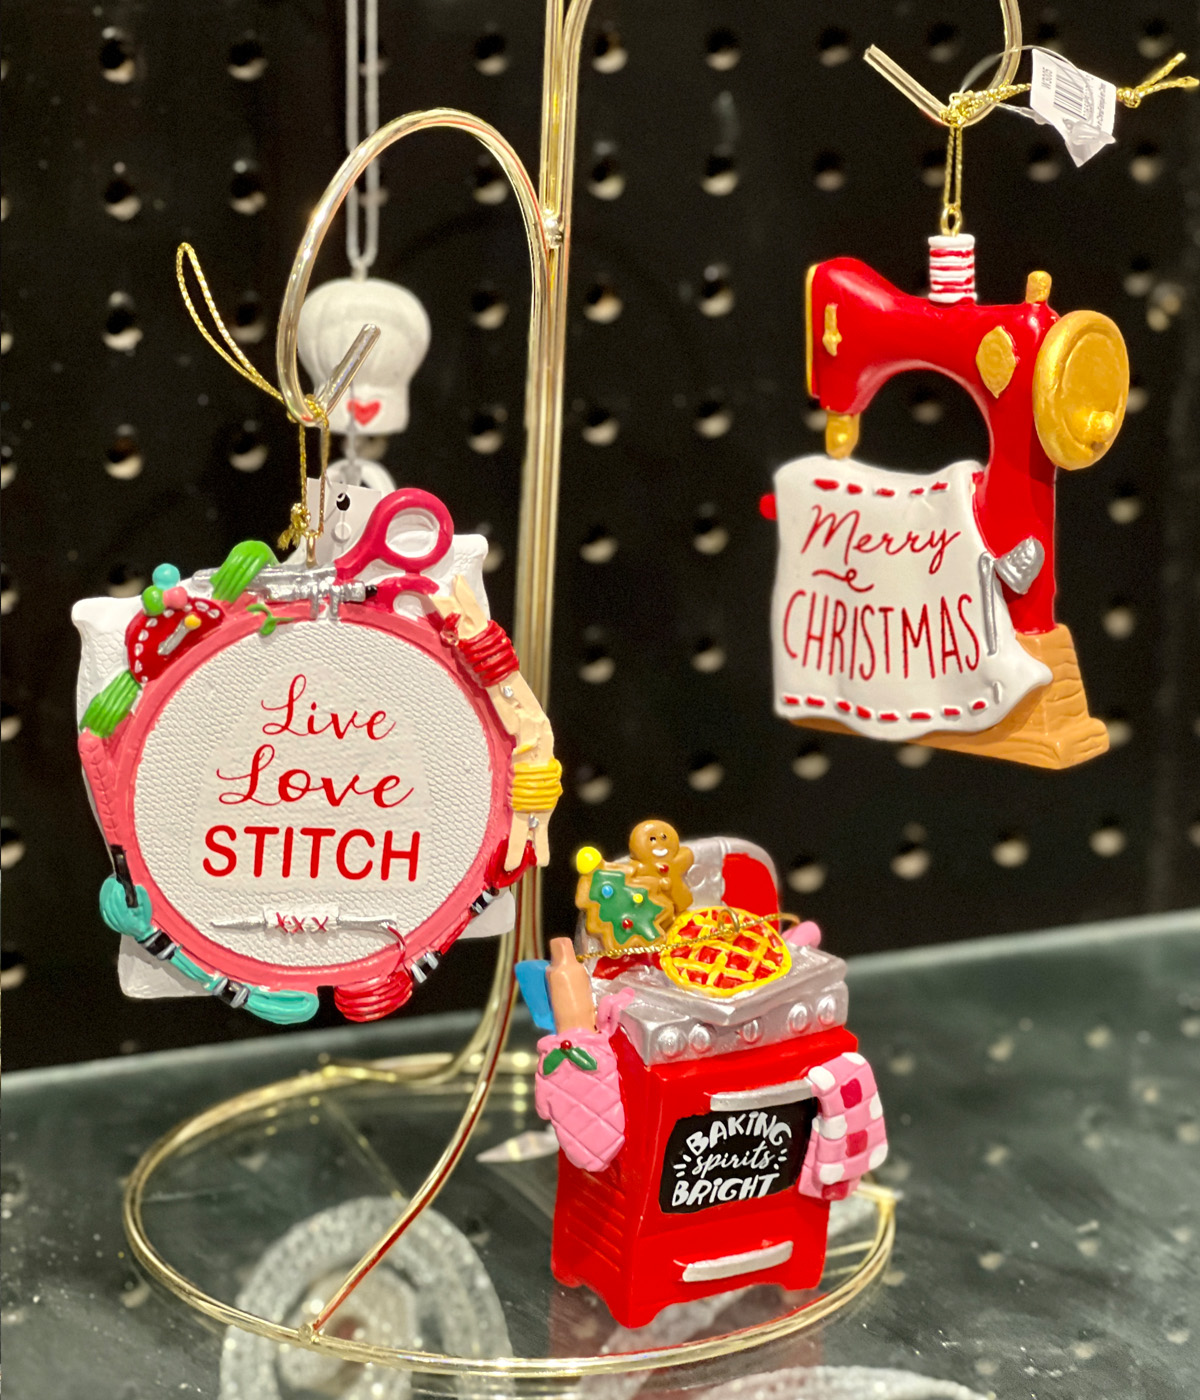 Sewing machine ornament, stitch ornament and stove for baking